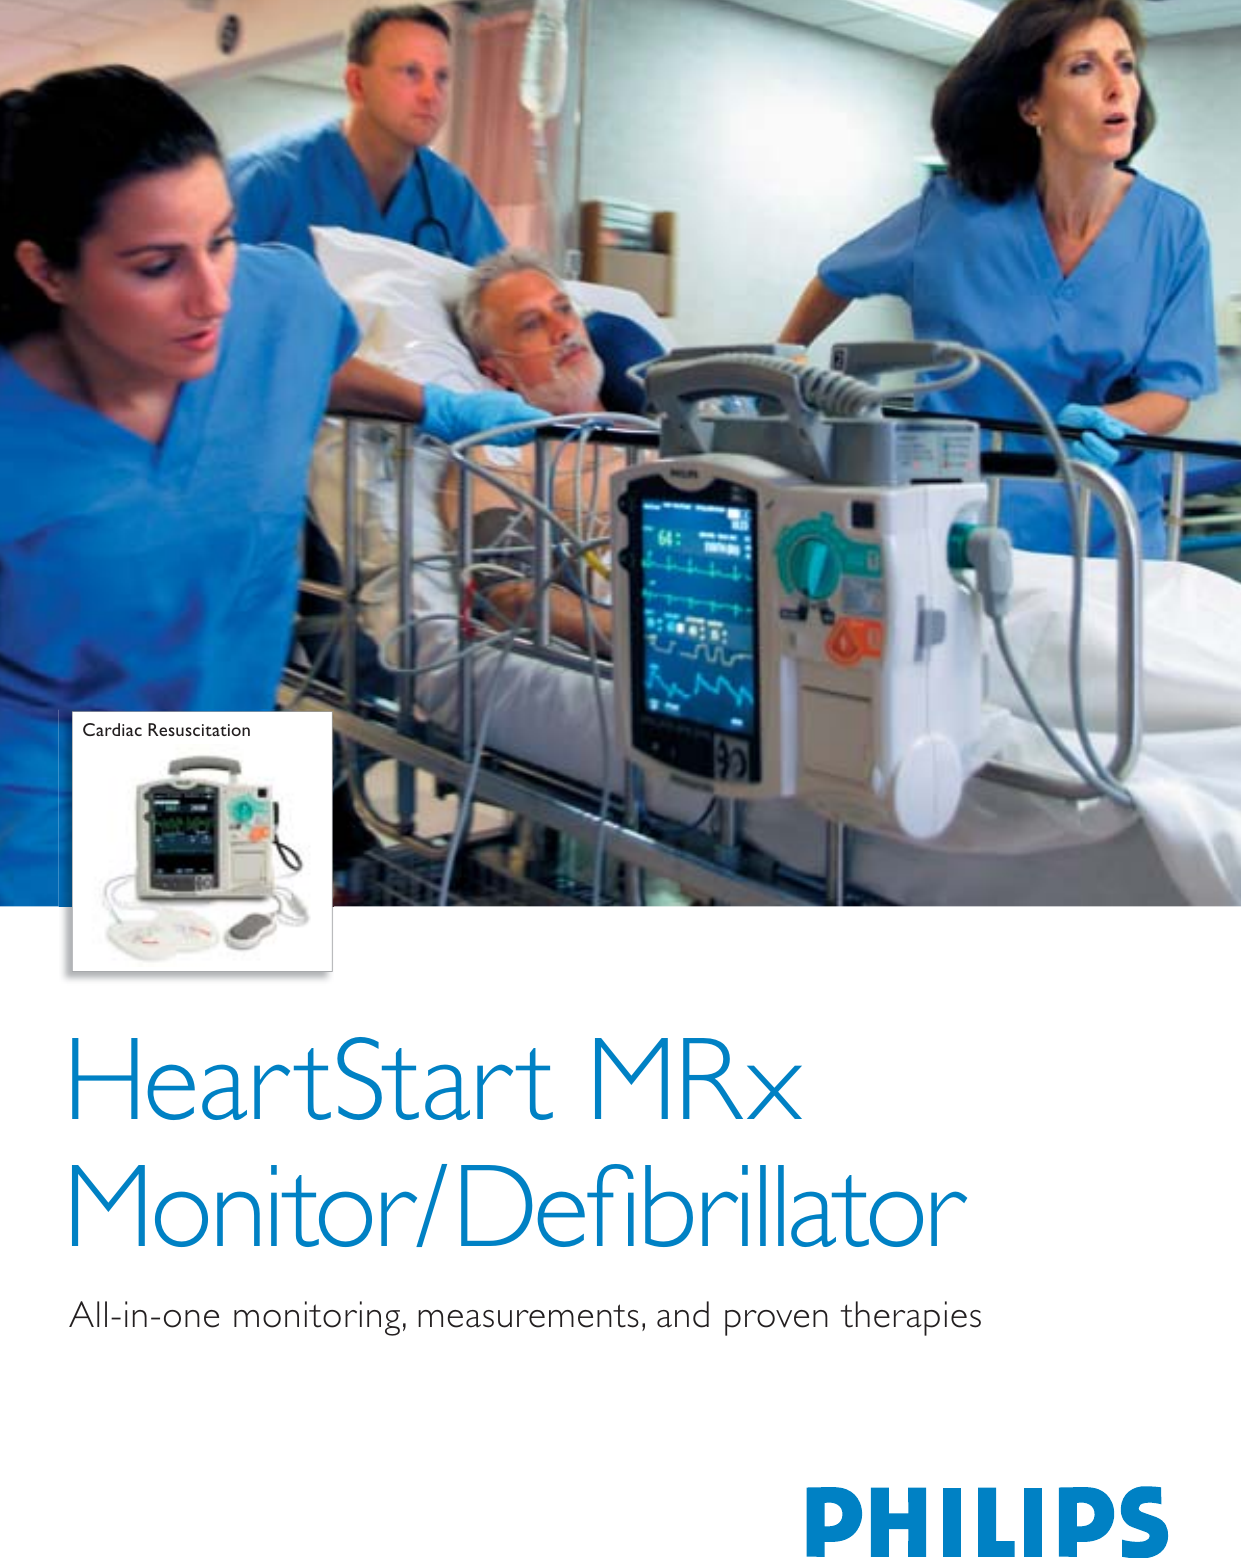 Page 1 of 12 - Philips 4522_962_24371 MRx Monitor/Defibrillator With Q-CPR And Intelli Vue Clinical Network Brochure - Hospital (ENG)